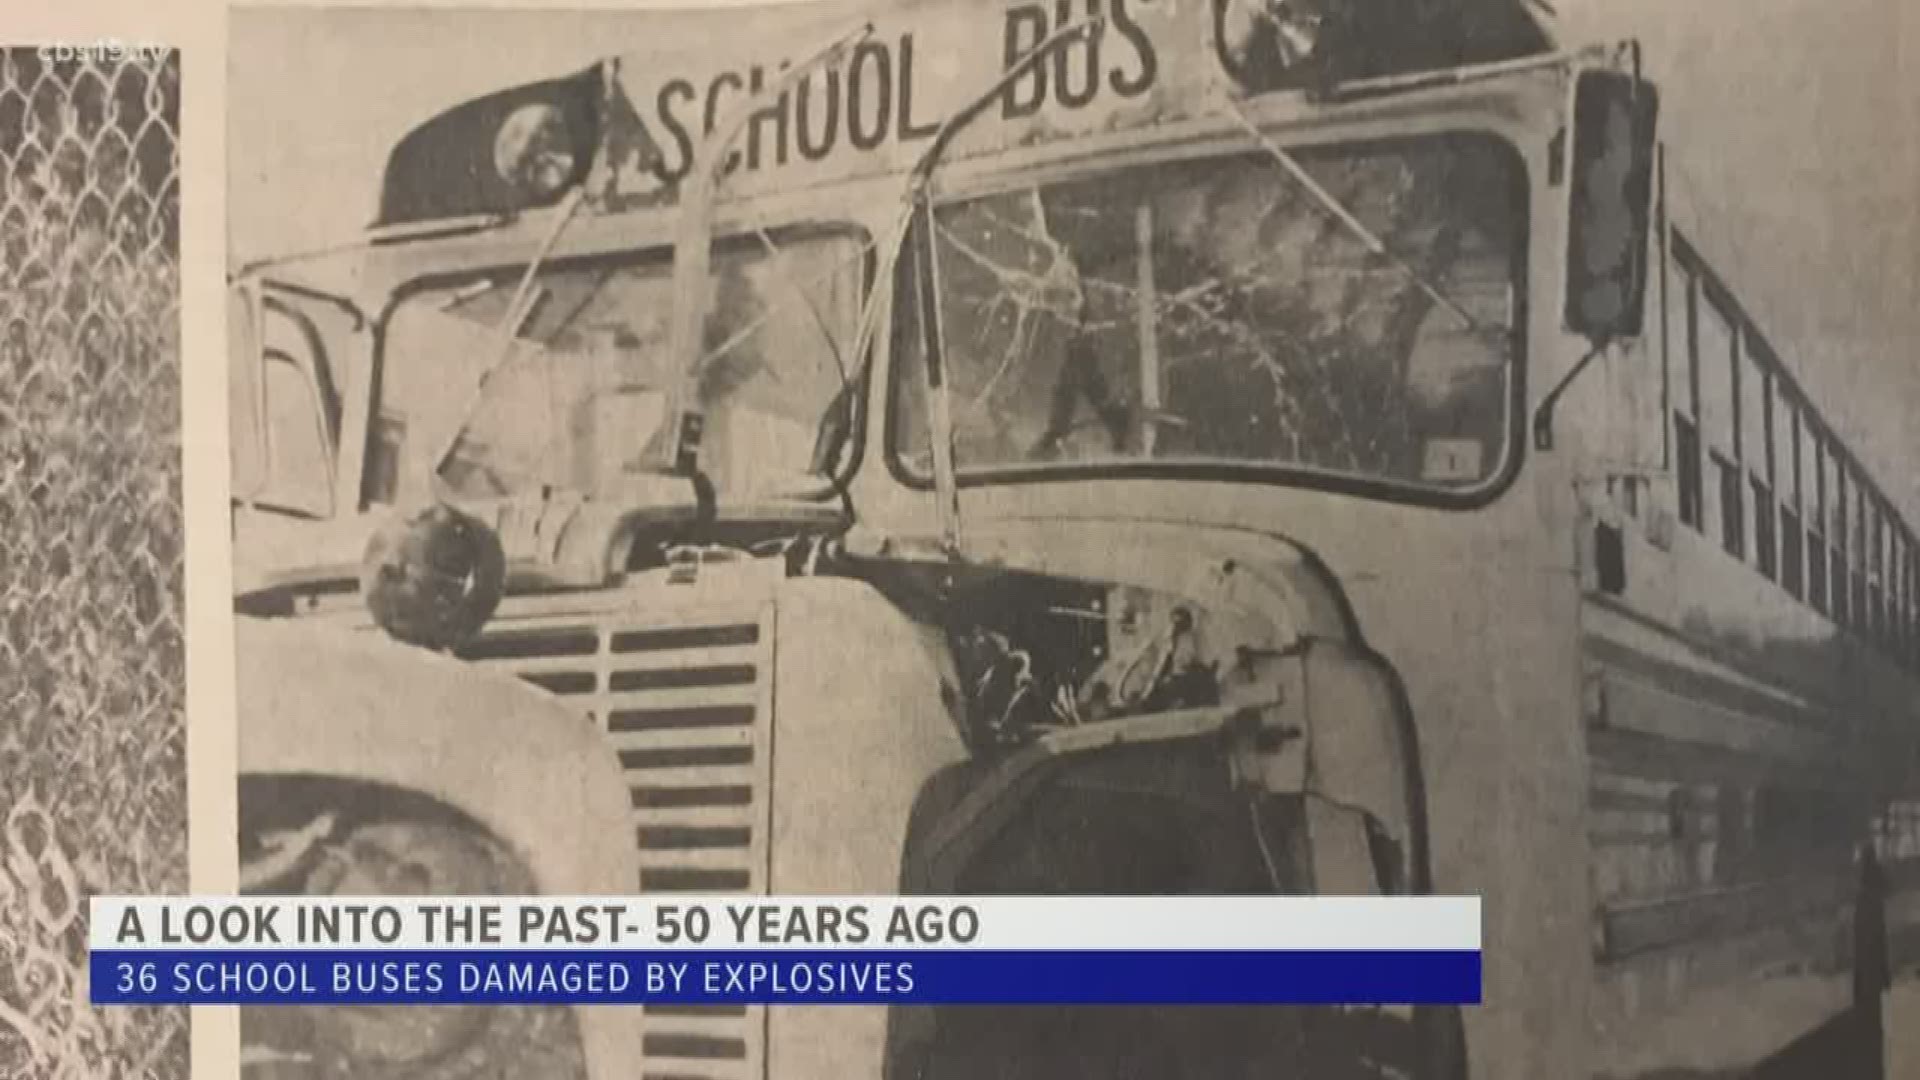 A look back: 50 years ago 36 buses damaged by explosives in response to integration